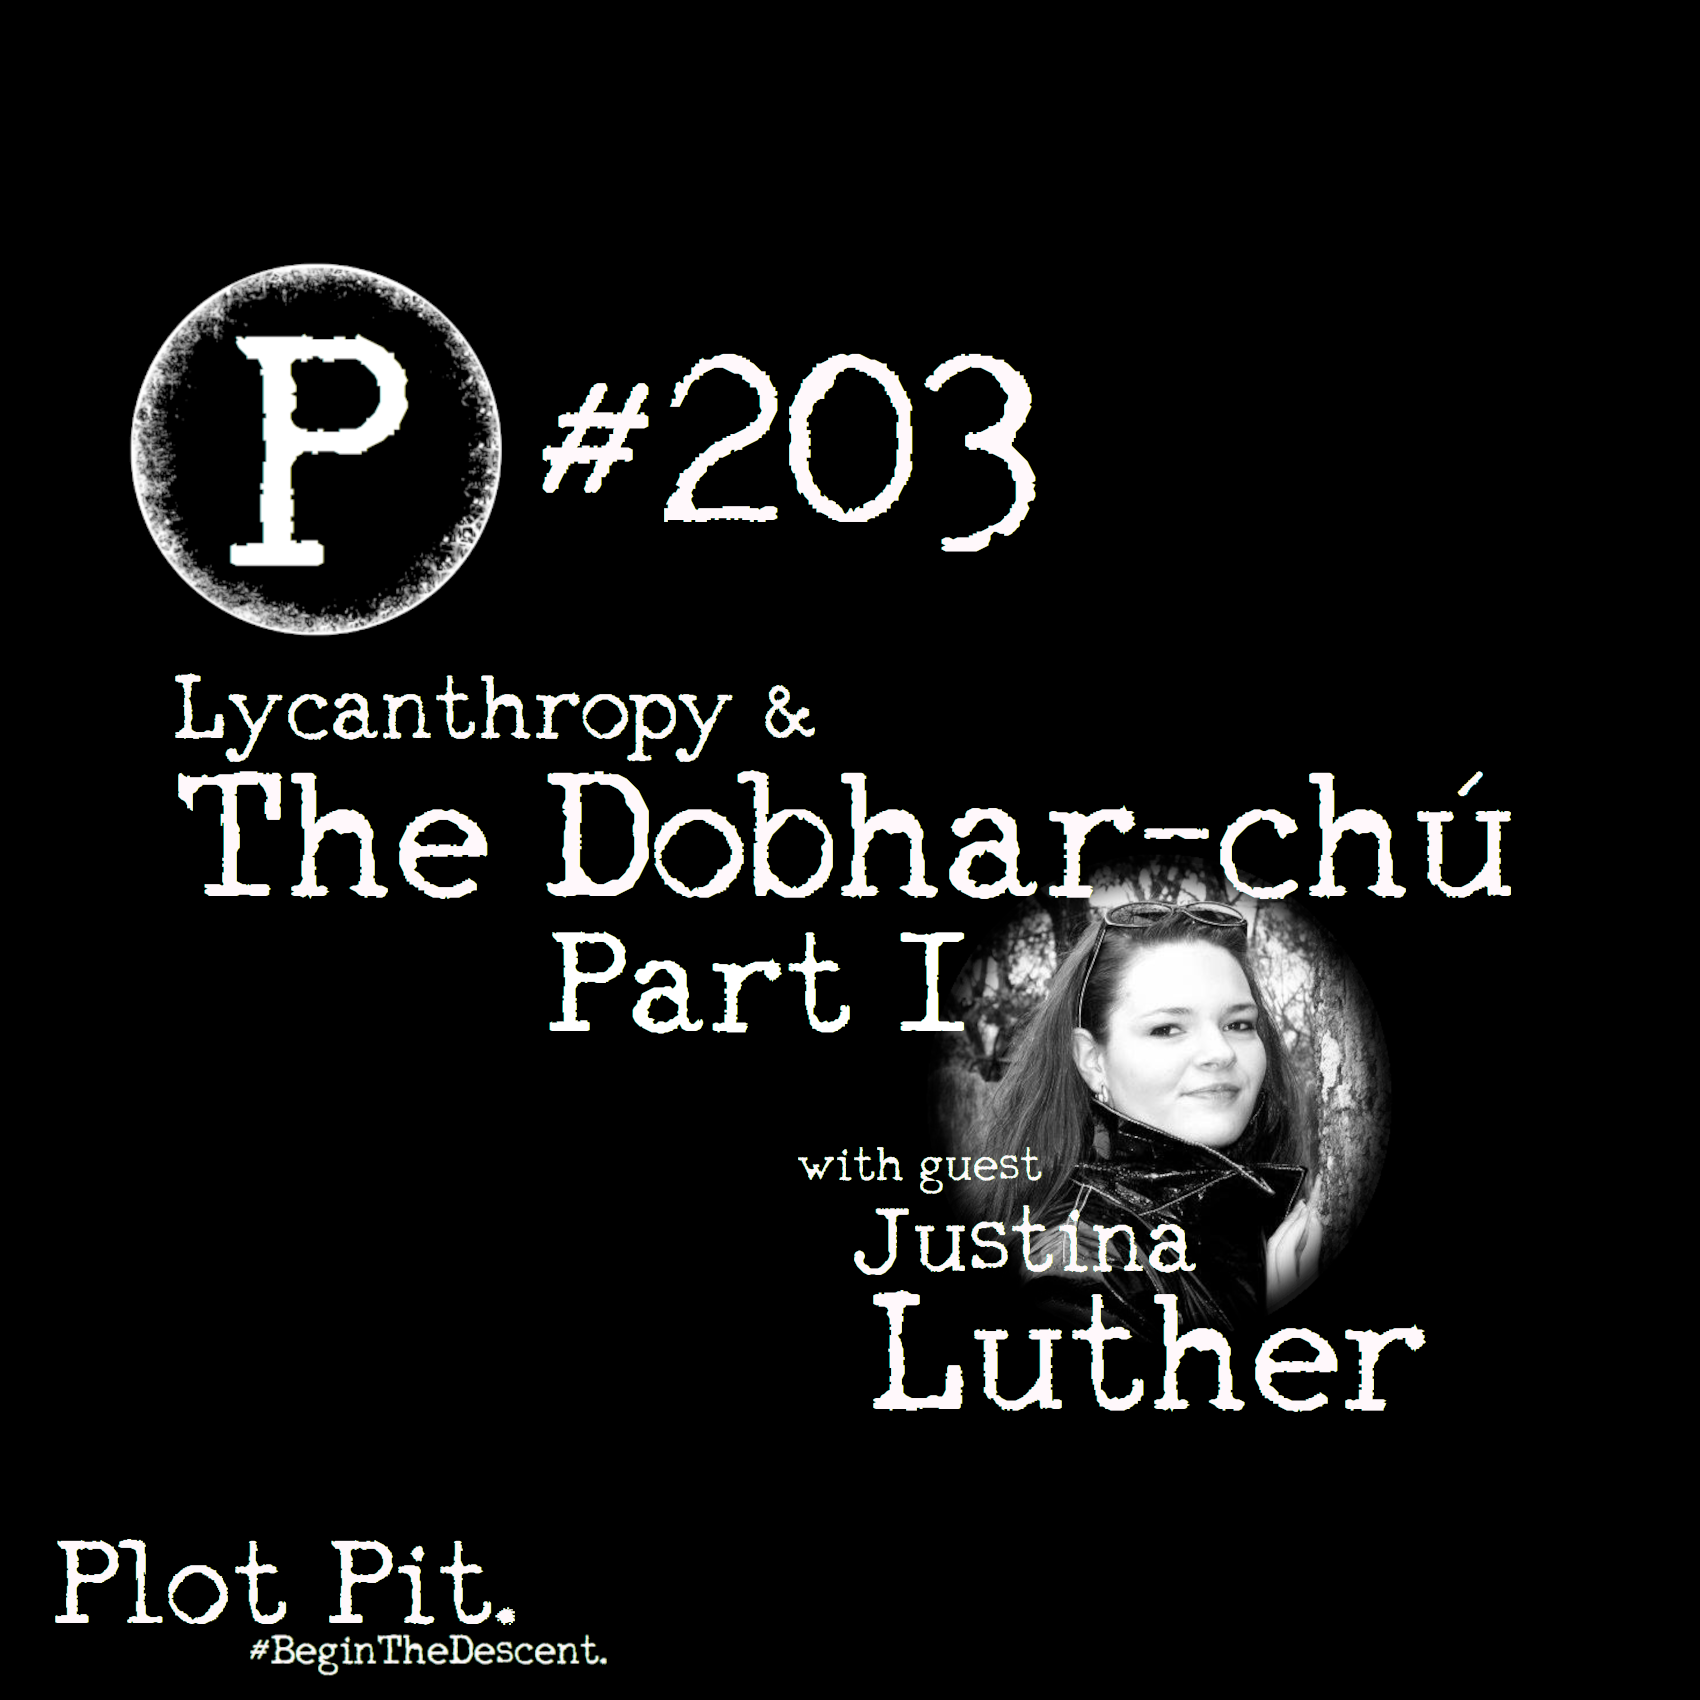 Lycanthropy & Dobhar-chú with Justina Luther - Part 1 of 2